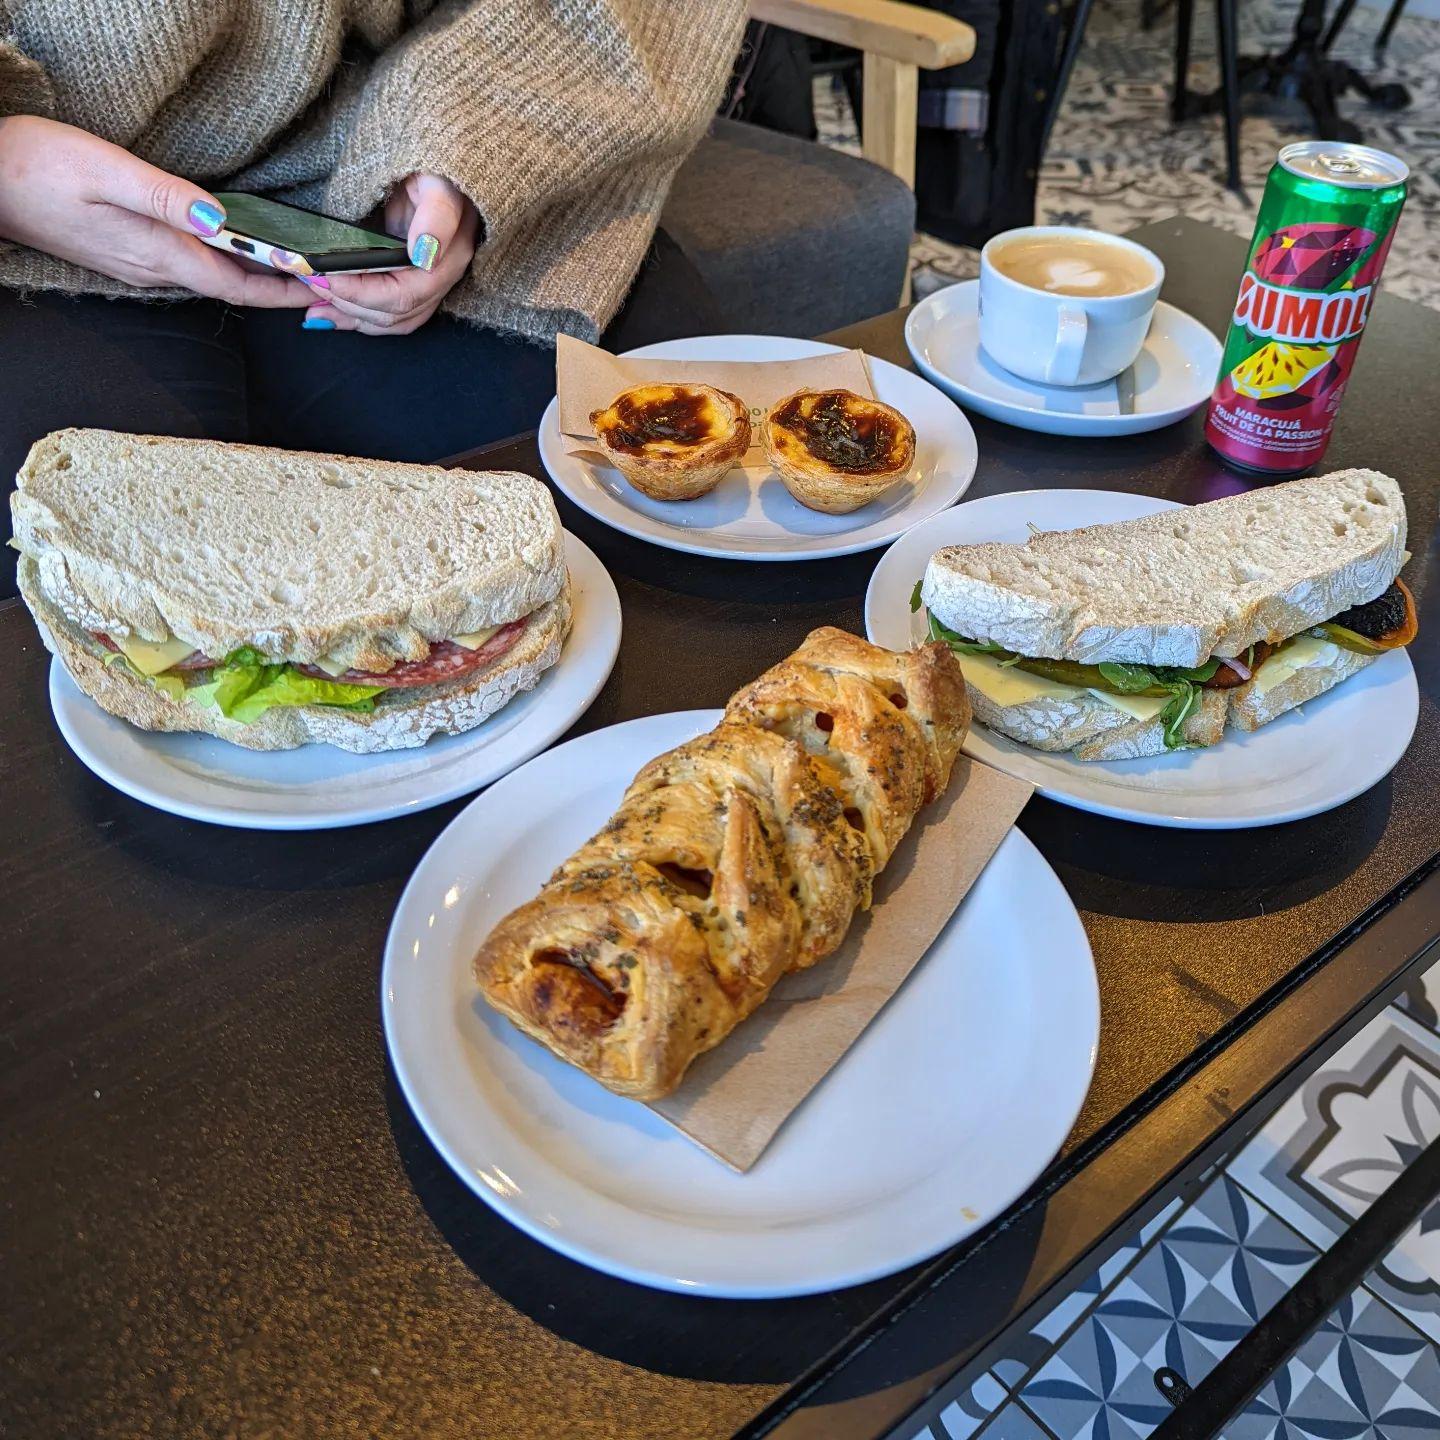 A lunch feast, including sandwiches, natas and plaits at Lisboa in Crookes